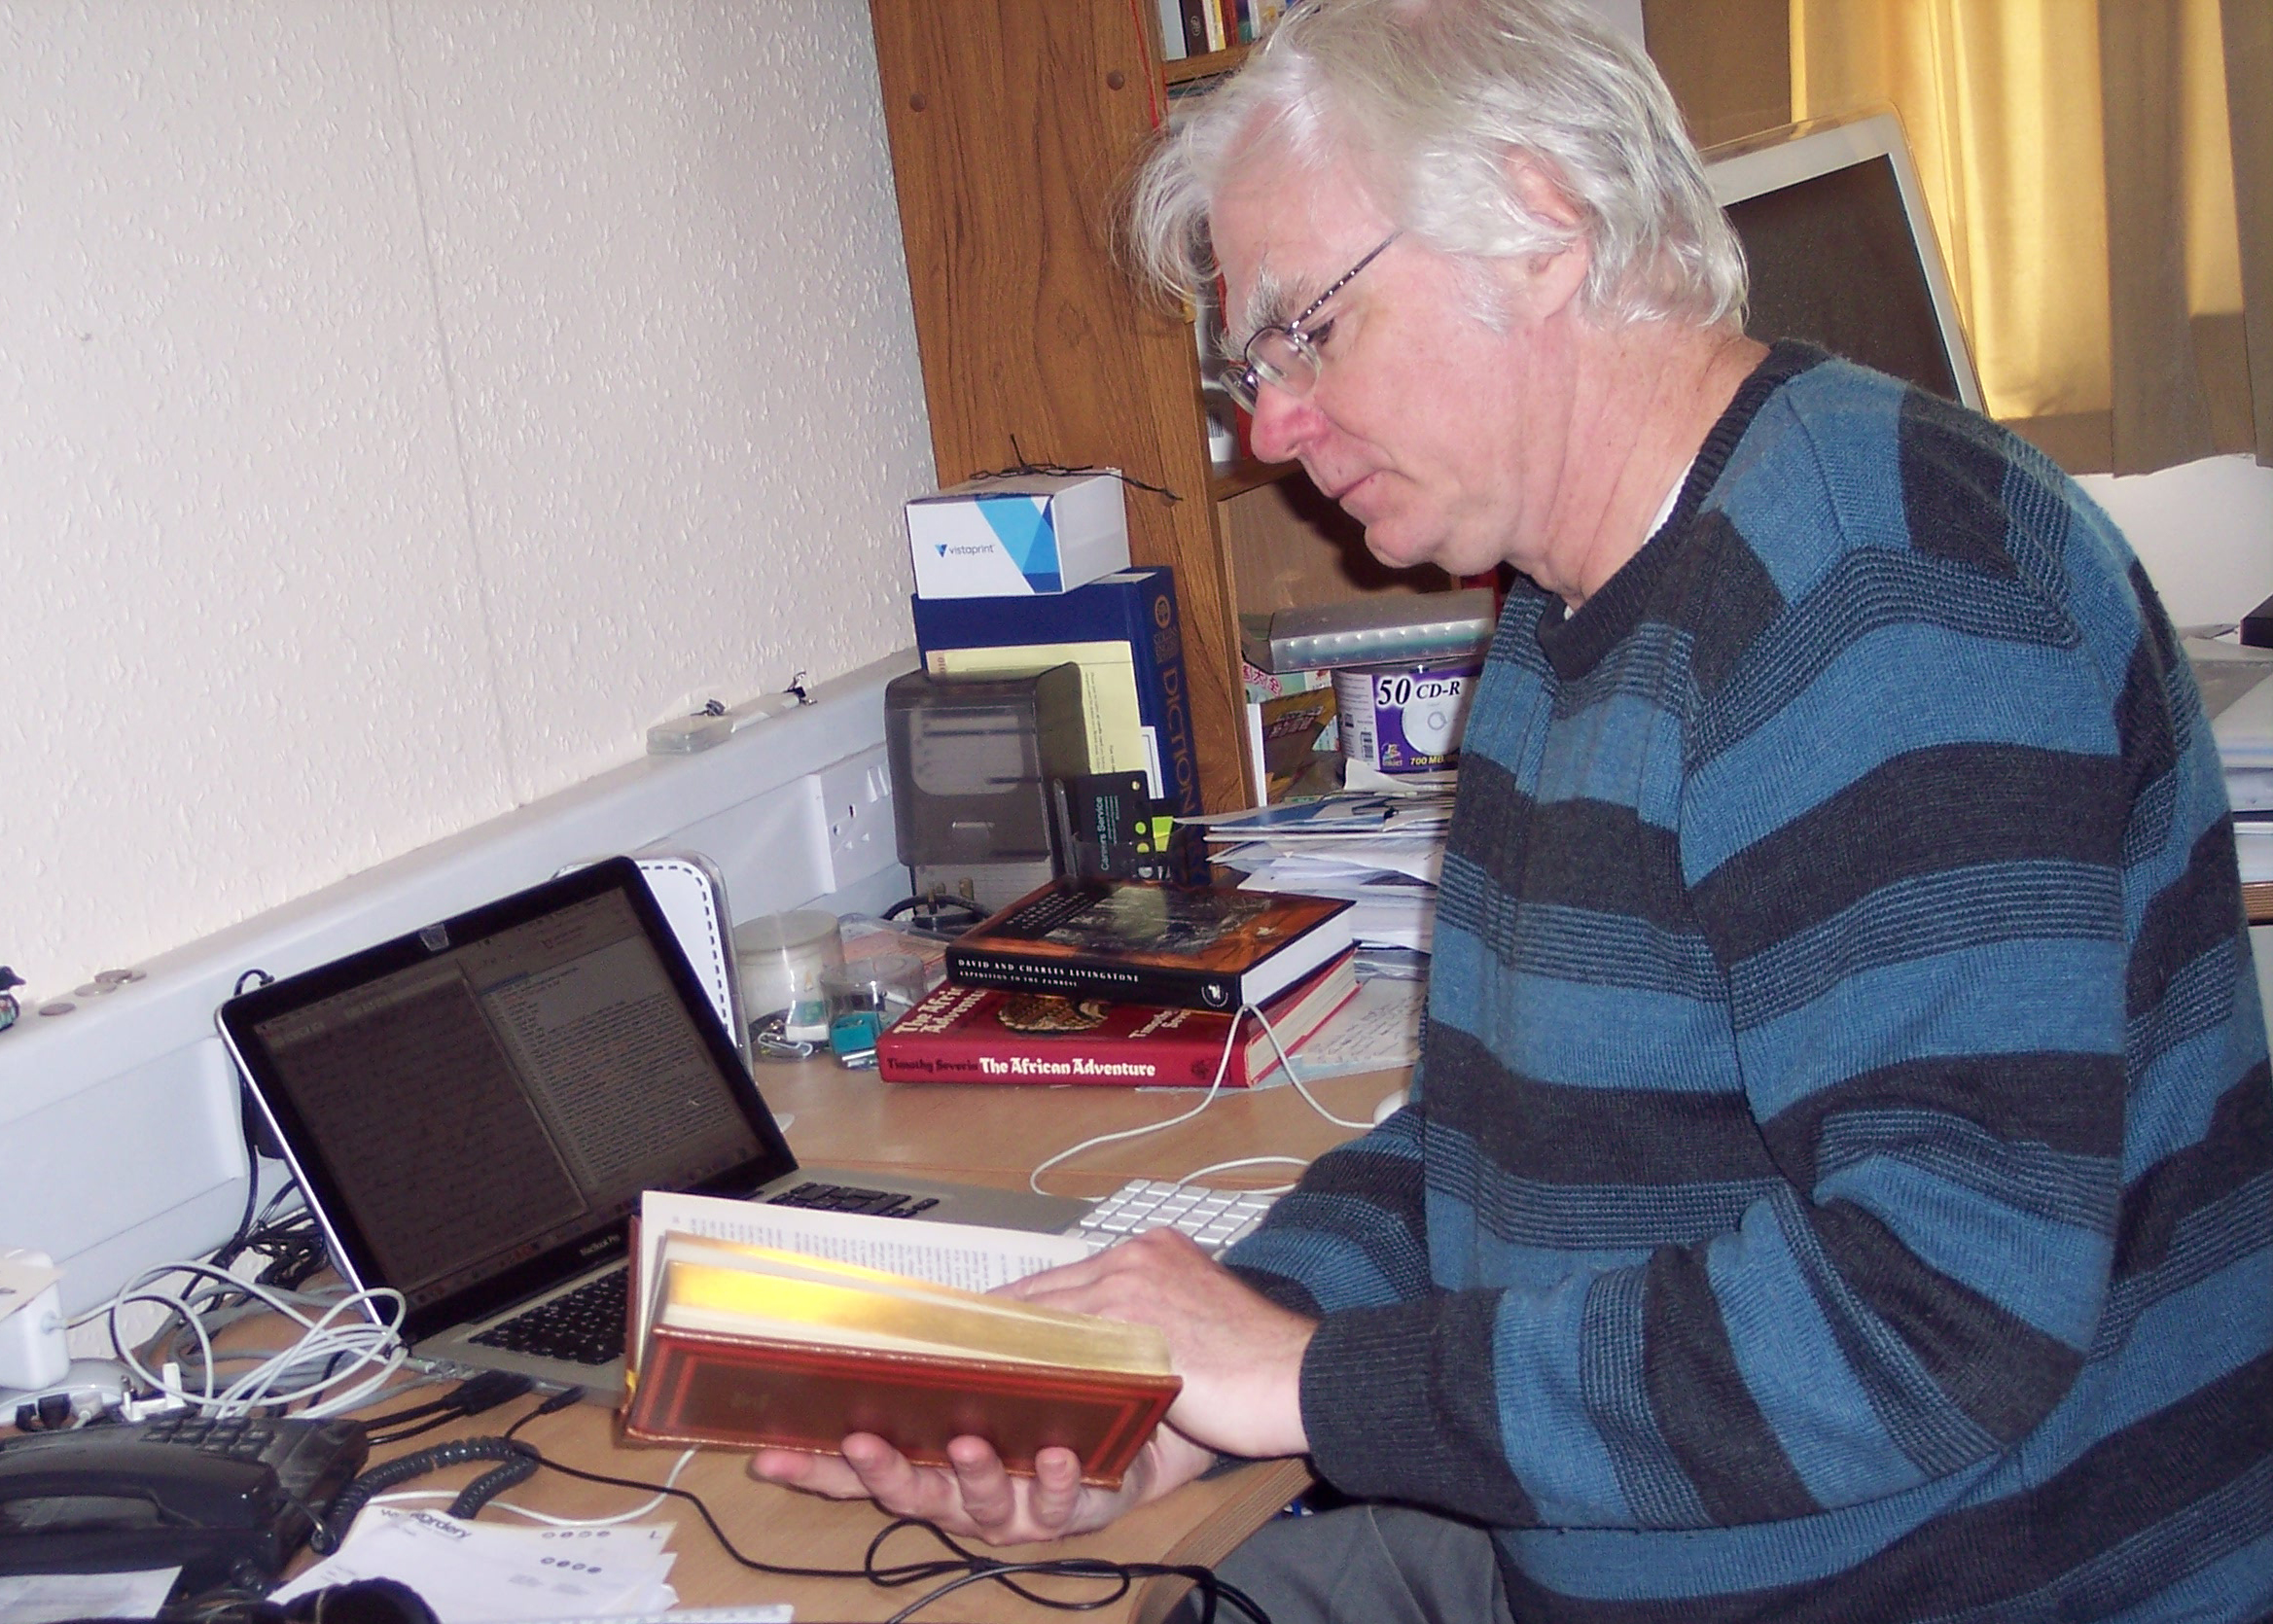 Stephen Hall in his office, Glasgow, 2019. Copyright Stephen Hall. Creative Commons Attribution-NonCommercial 3.0 Unported (https://creativecommons.org/licenses/by-nc/3.0/).